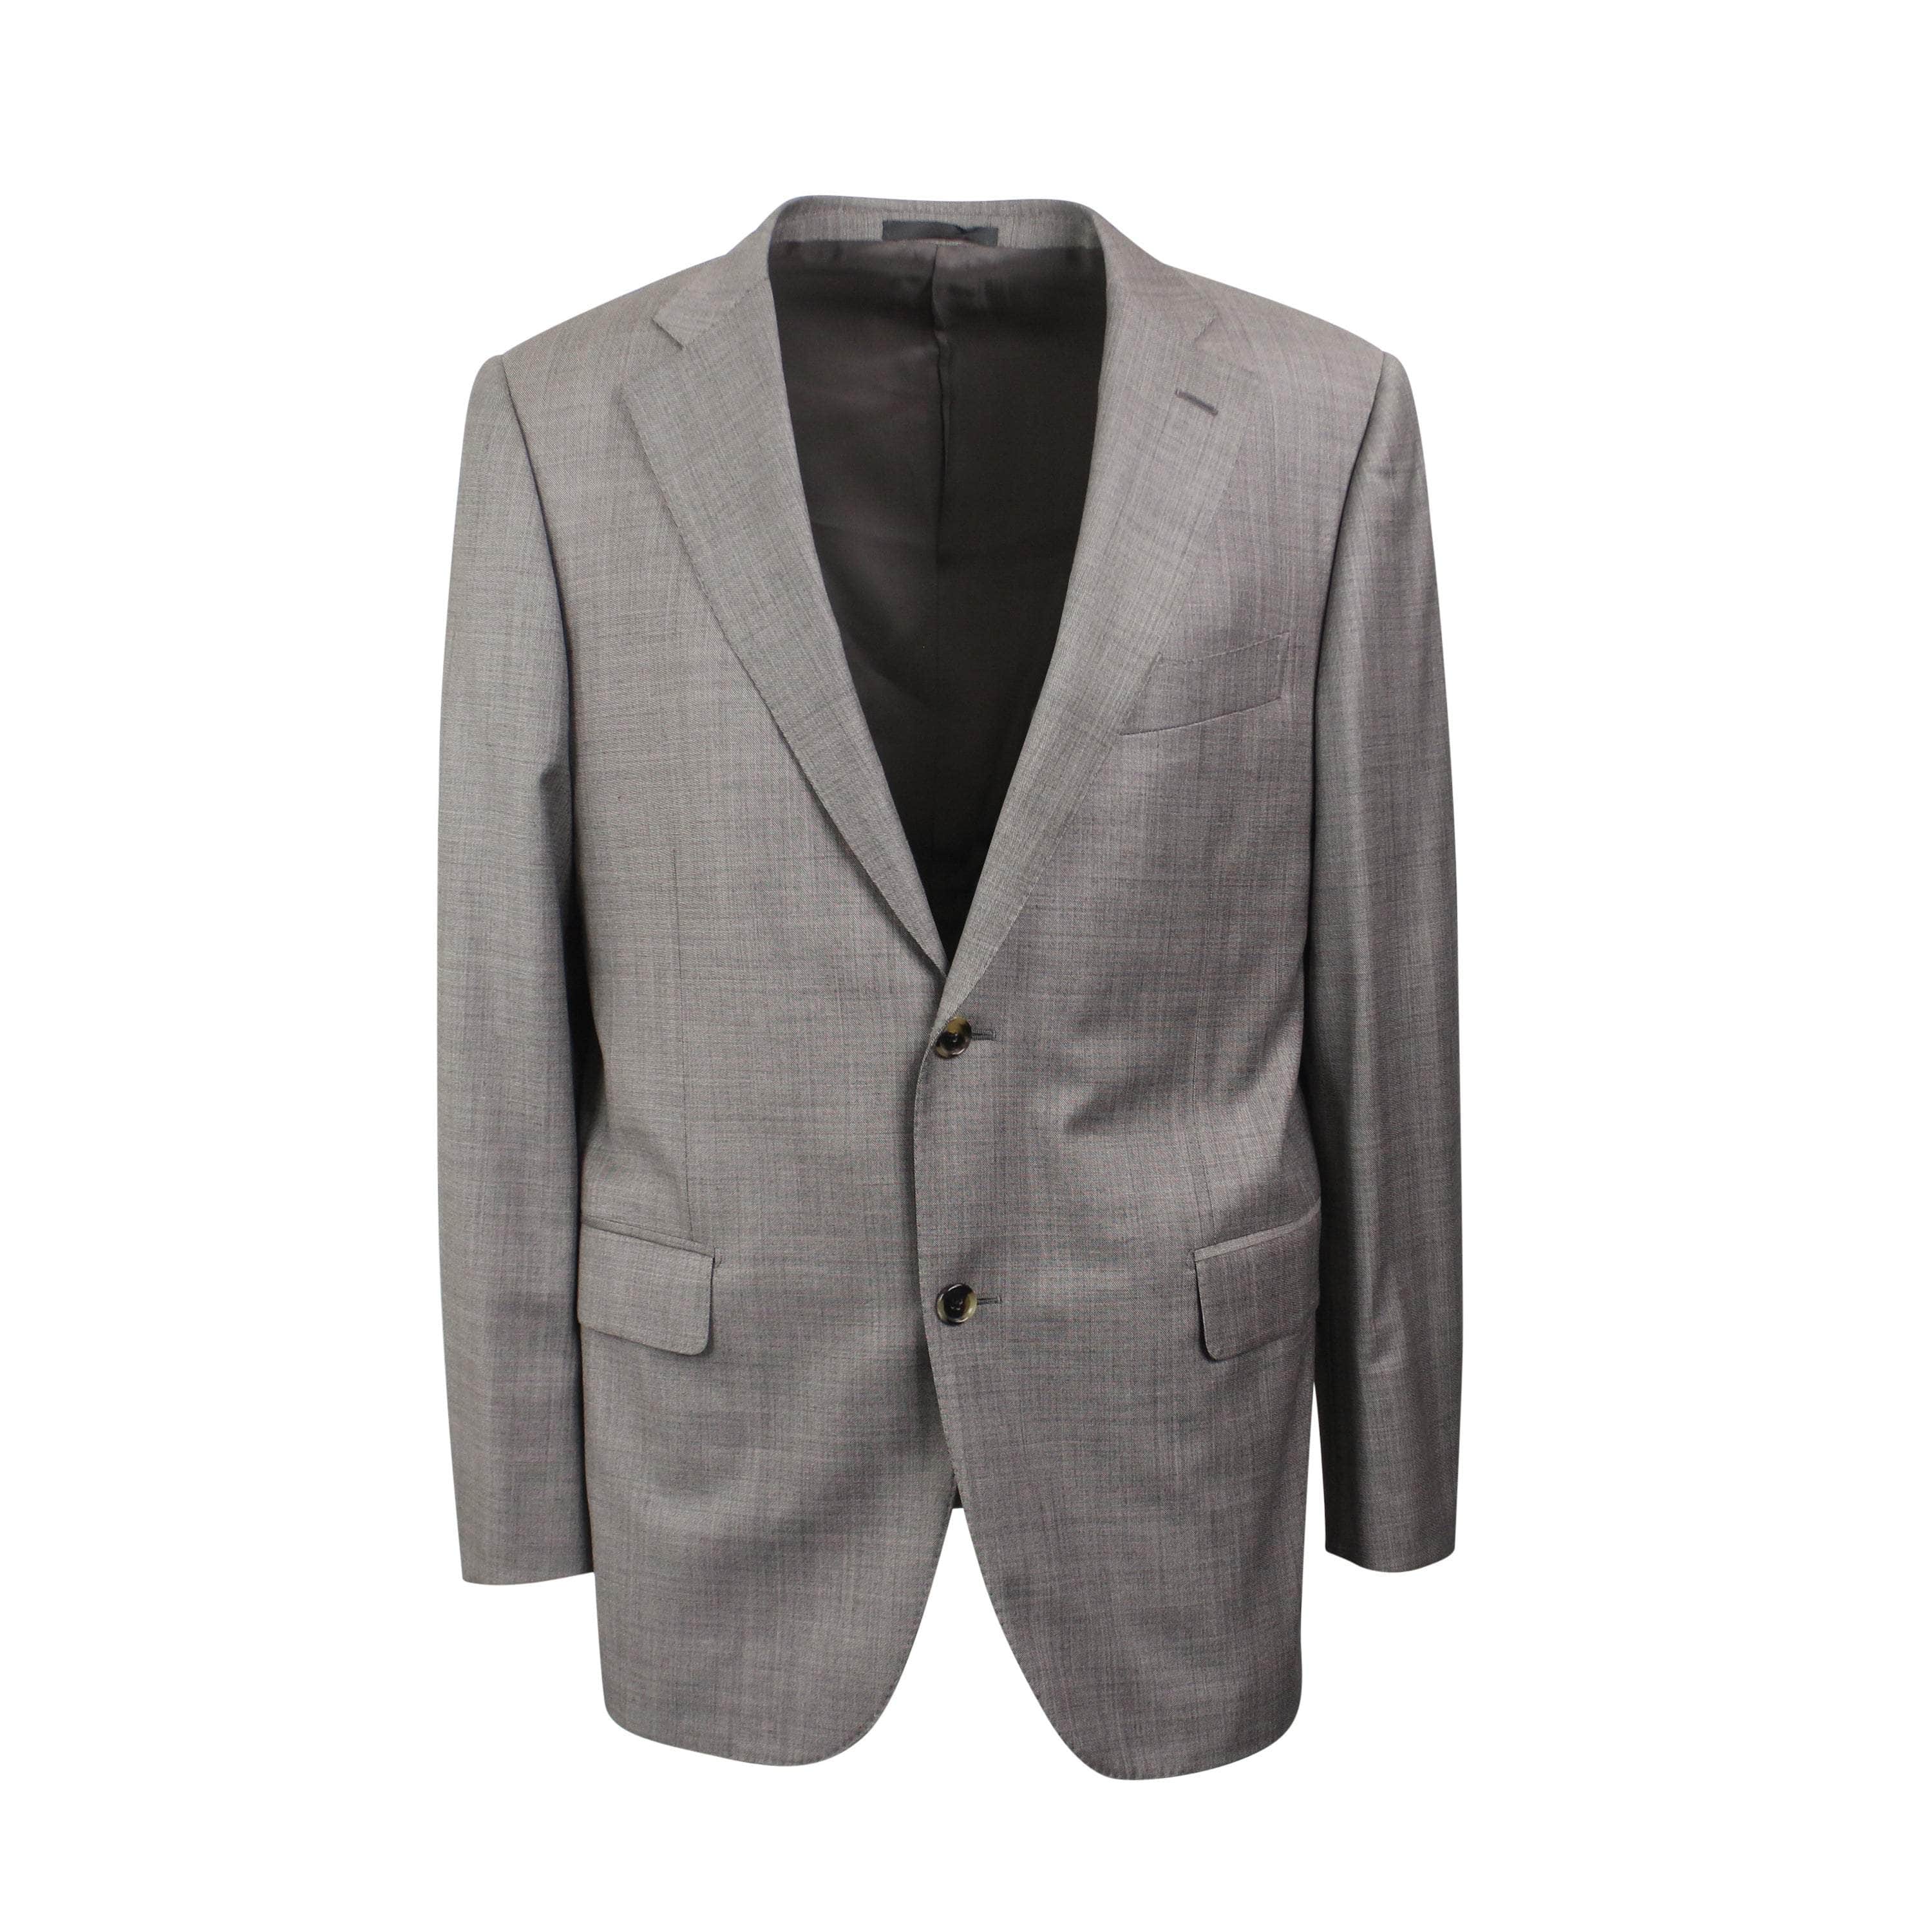 Caruso 500-750, caruso, channelenable-all, chicmi, couponcollection, main-clothing, shop375, size-50, Stadium Goods, stadiumgoods 50 Single Breasted Light Grey Plaid Wool Suit CRS-XTPS-0164/50 CRS-XTPS-0164/50